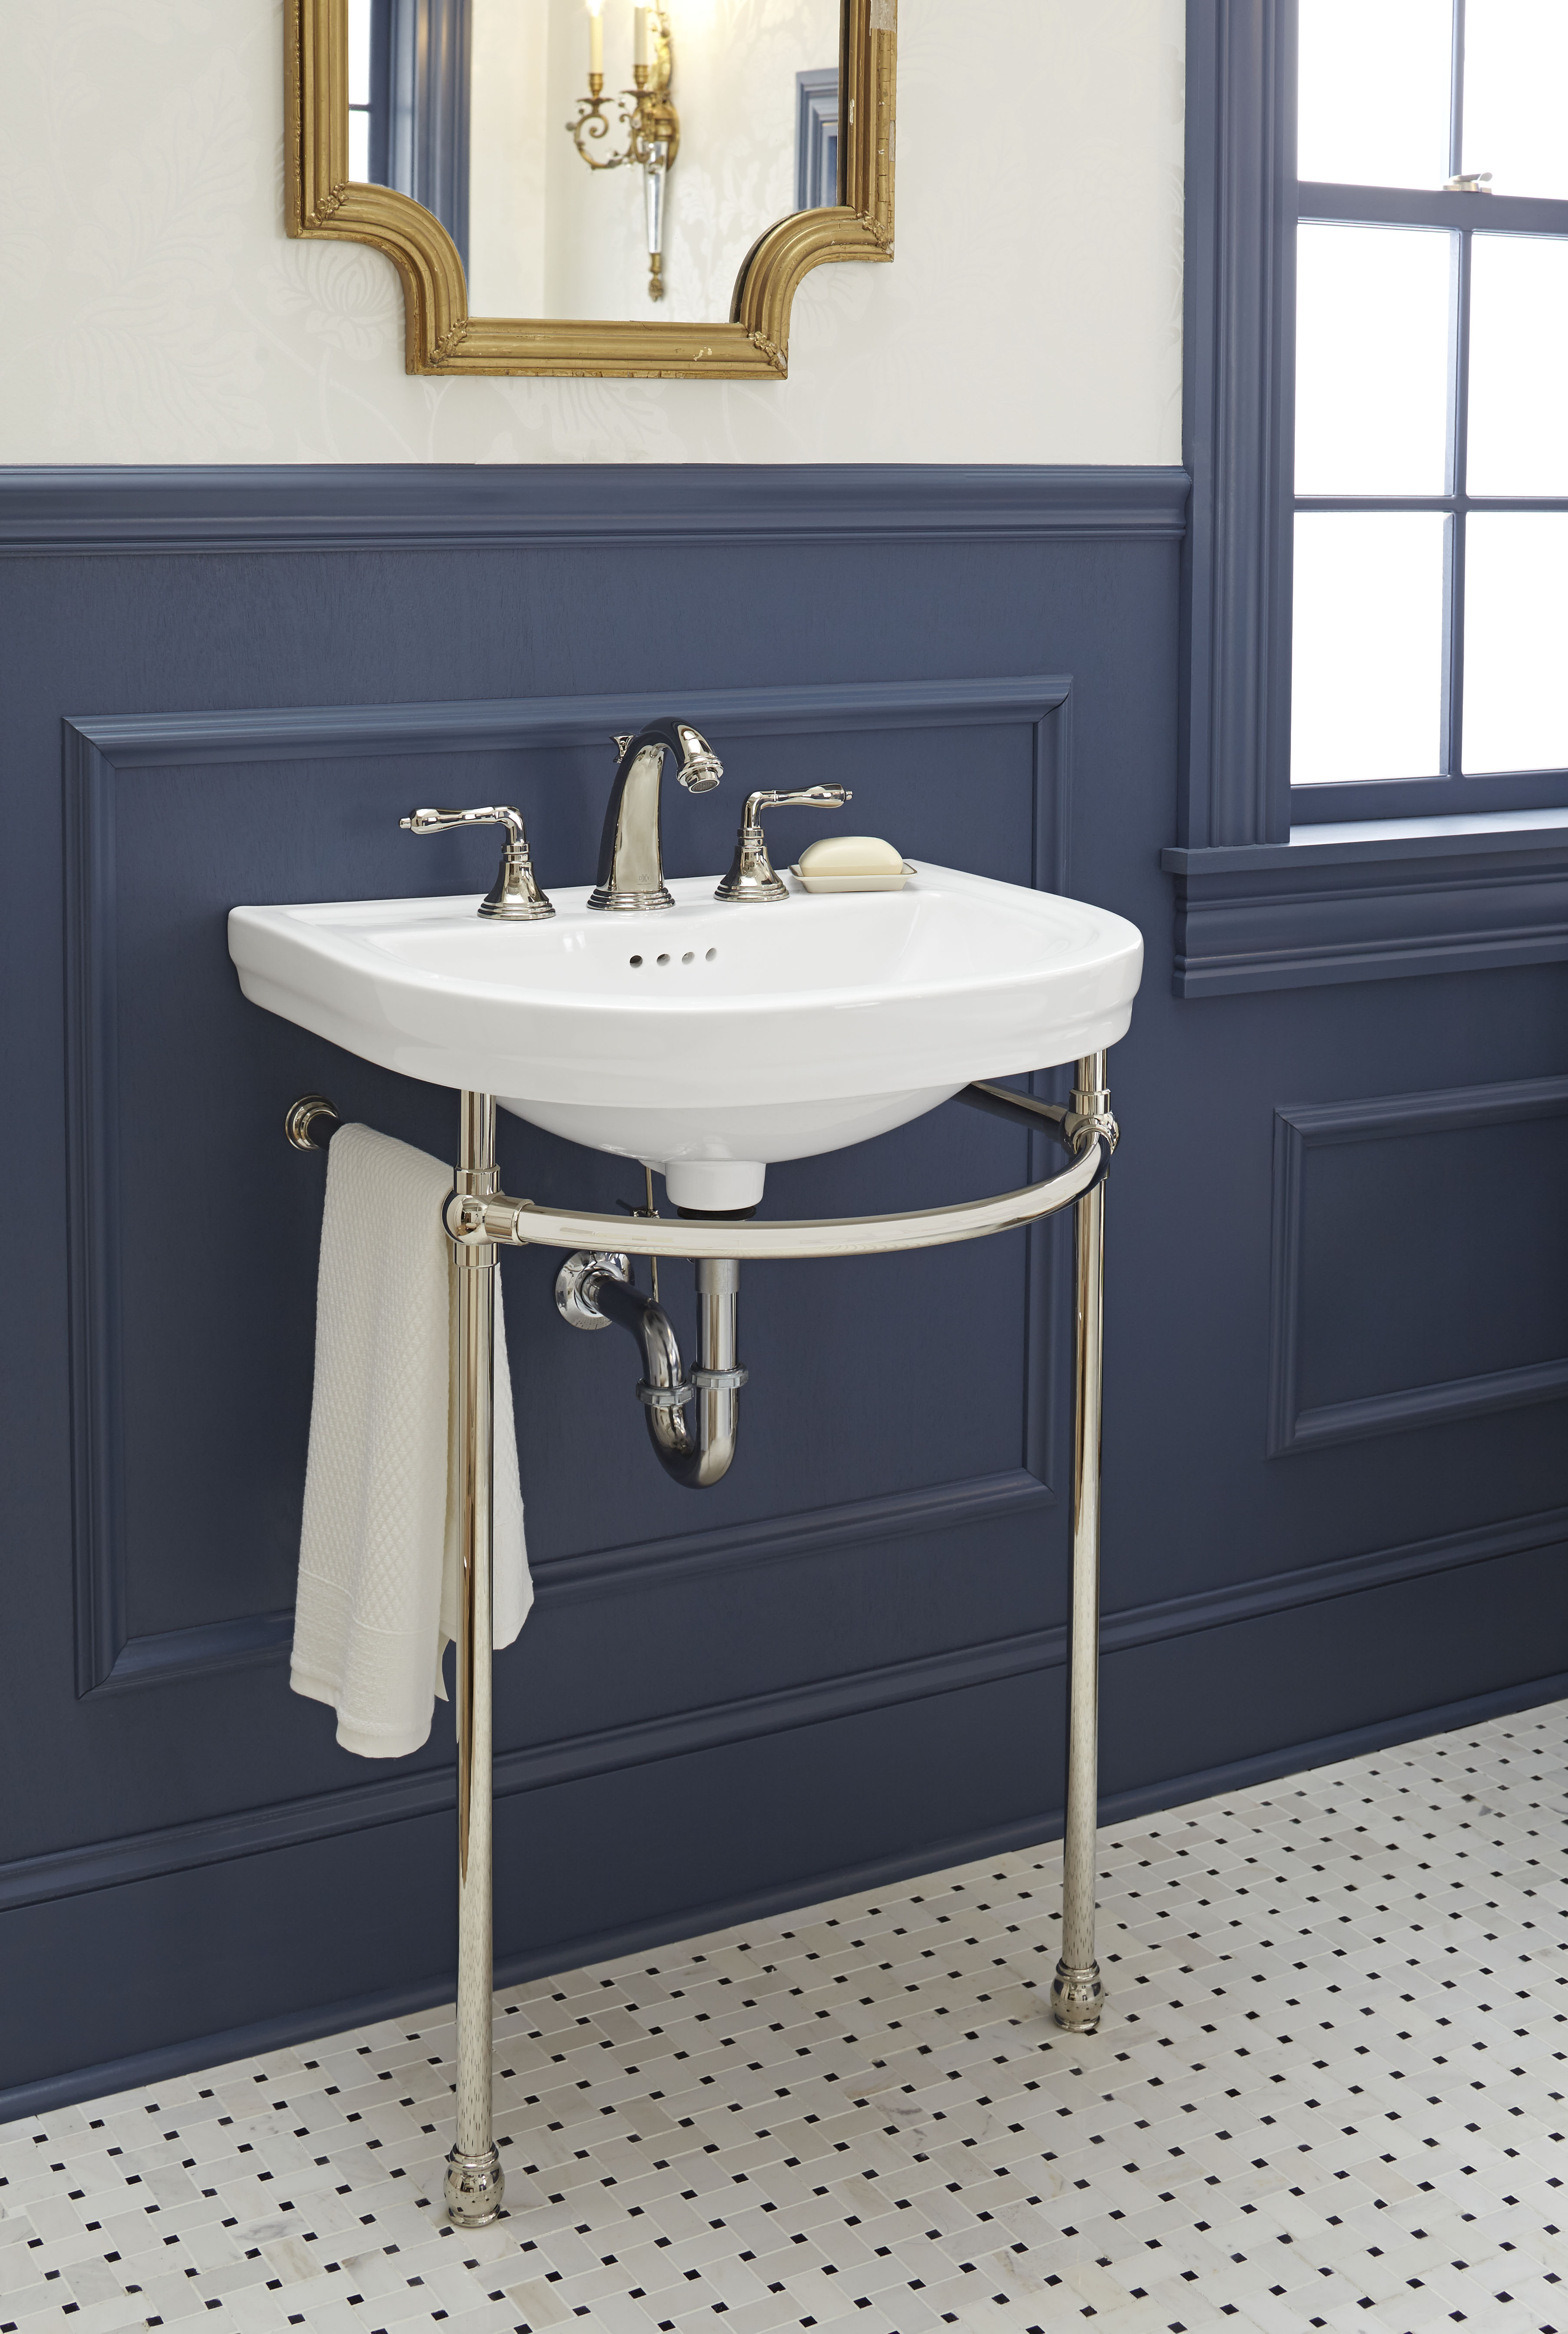 St. George® 24 in. Console Bathroom Sink, 3 Hole with Console Leg